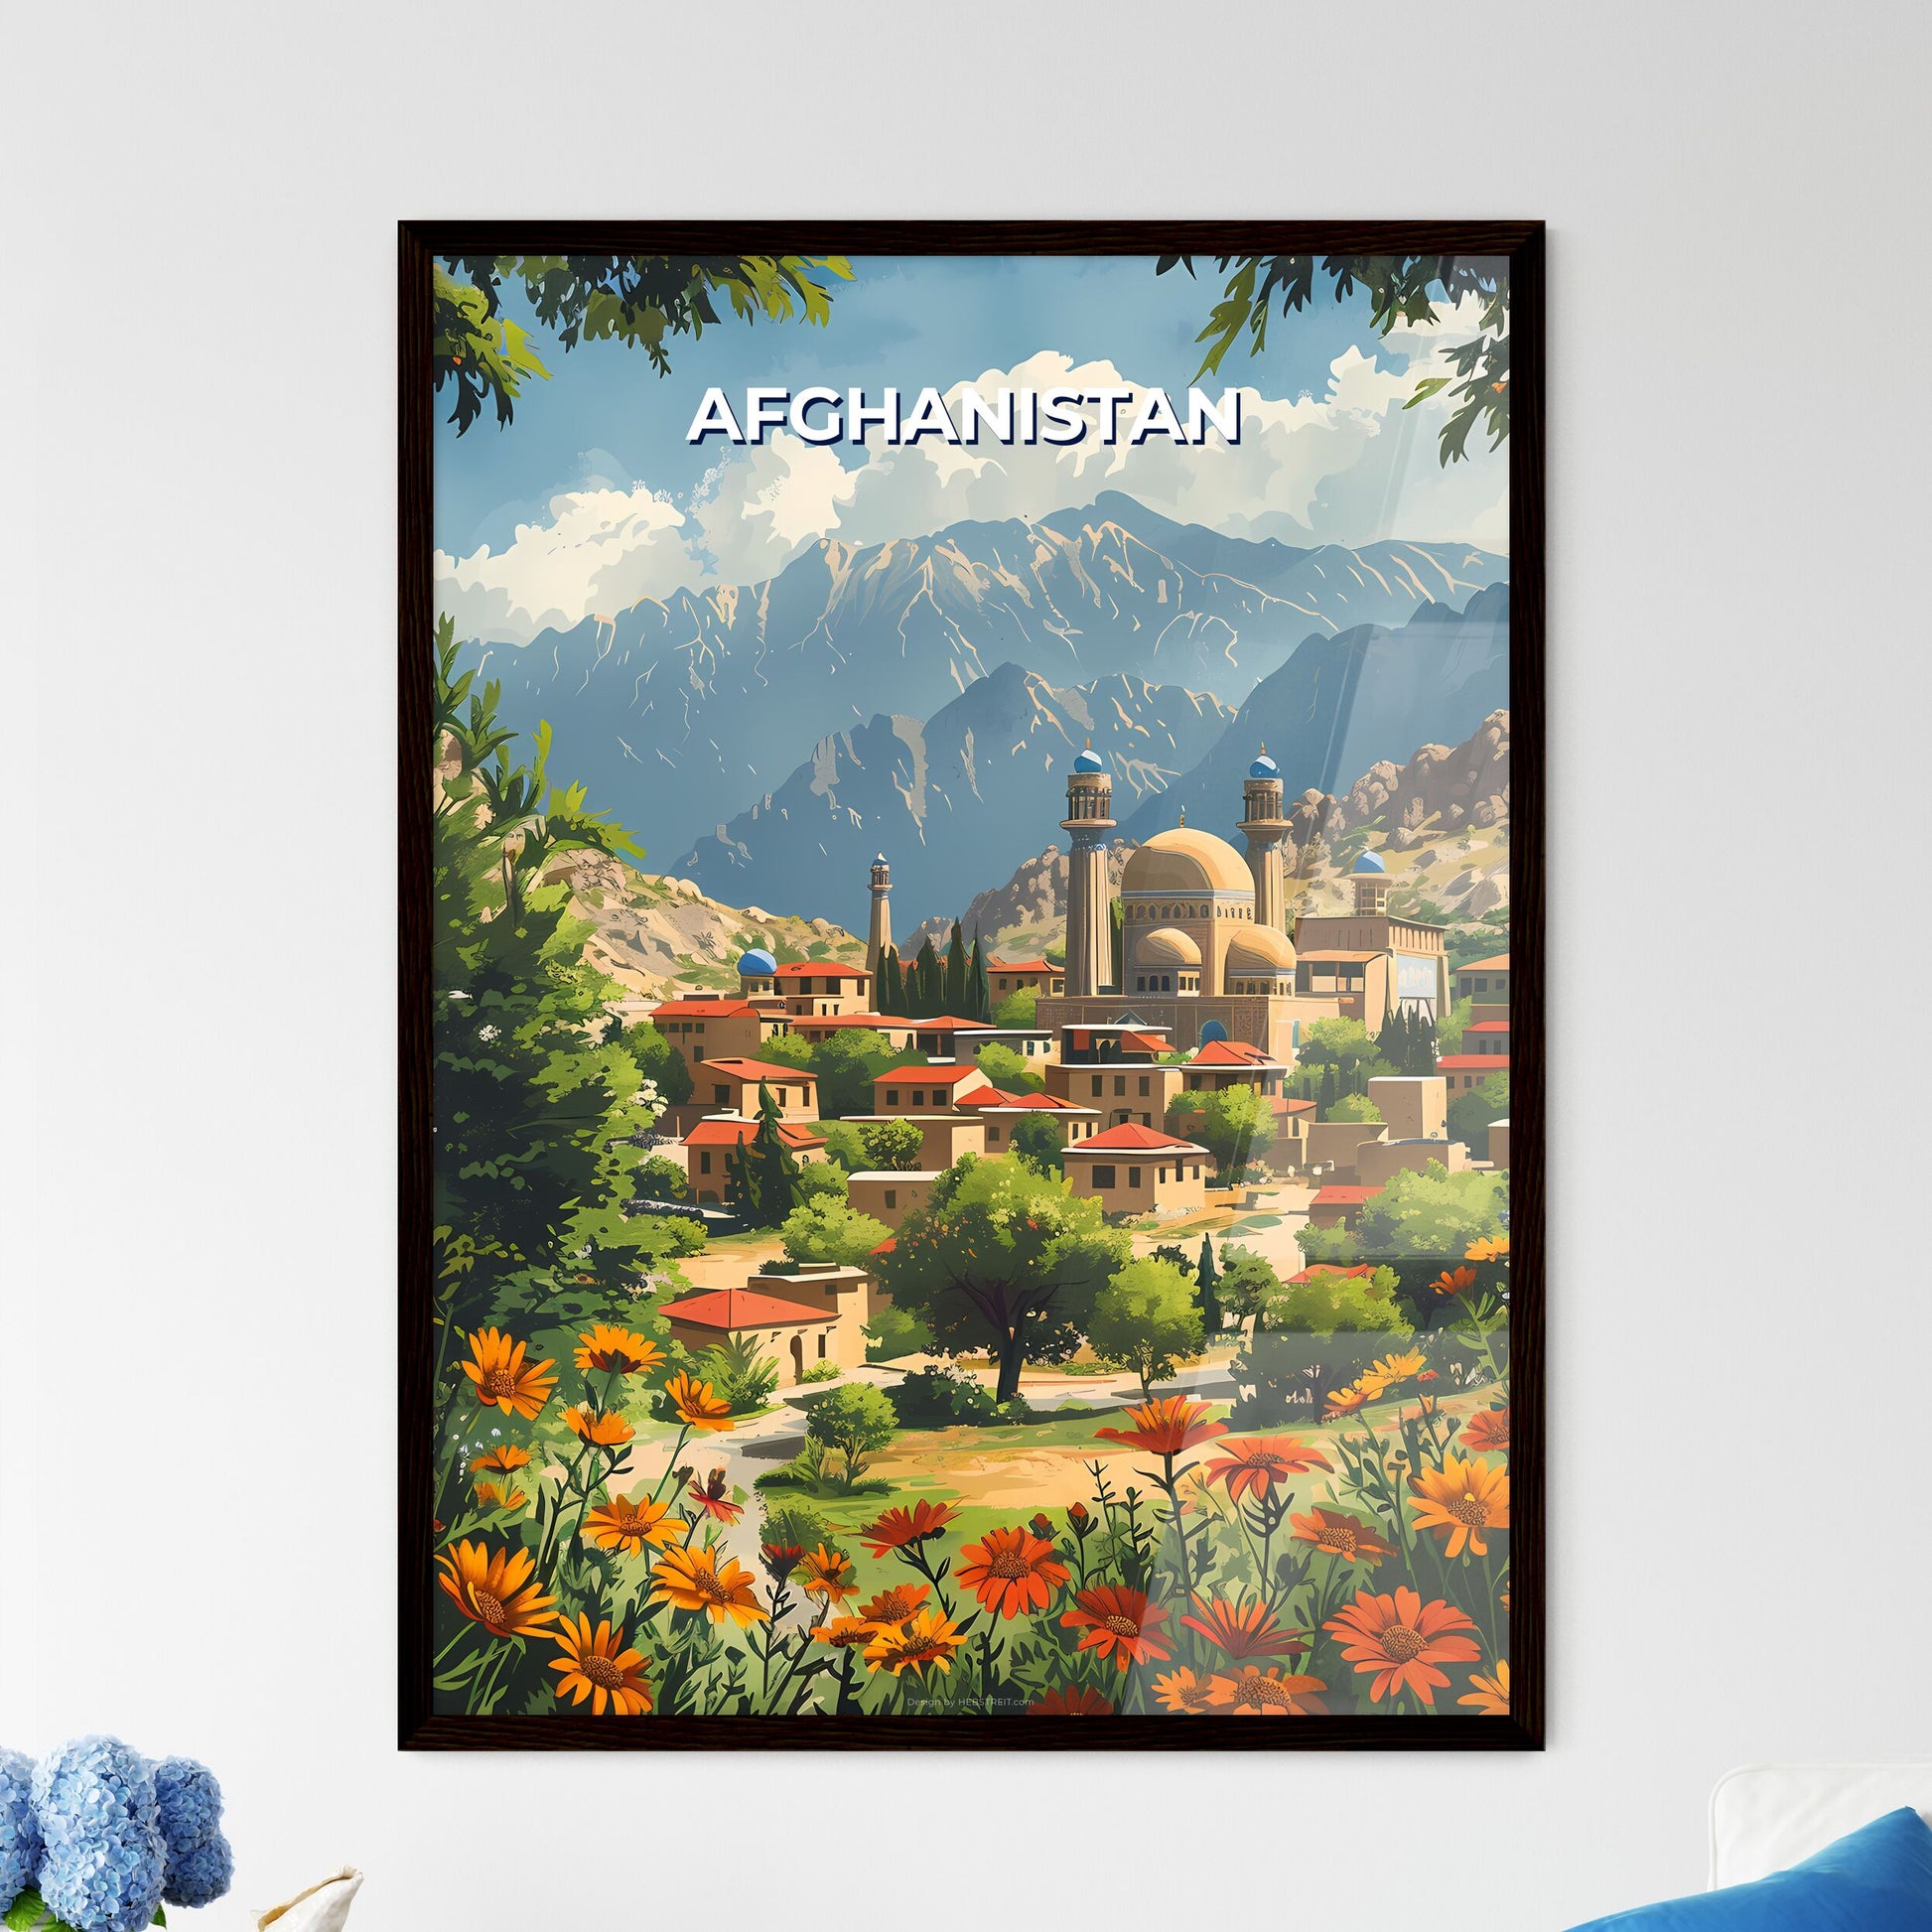 Afghanistan, South Asia - Artistic depiction of a traditional village nestled amidst mountains and vibrant flora